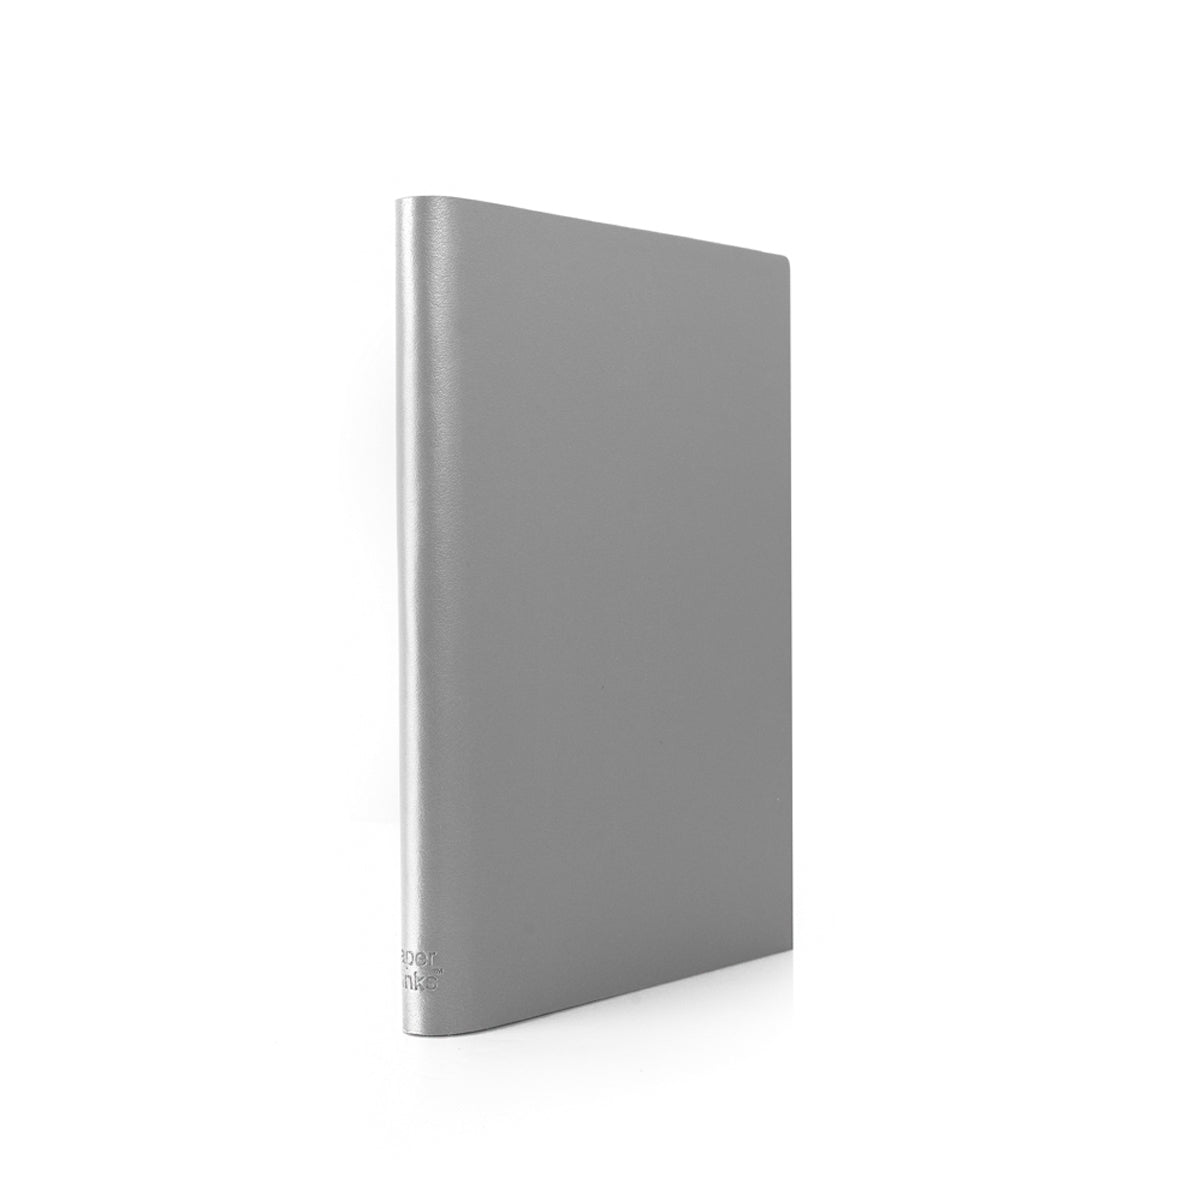 Paperthinks Recycled Leather Large Ruled Notebook Silver